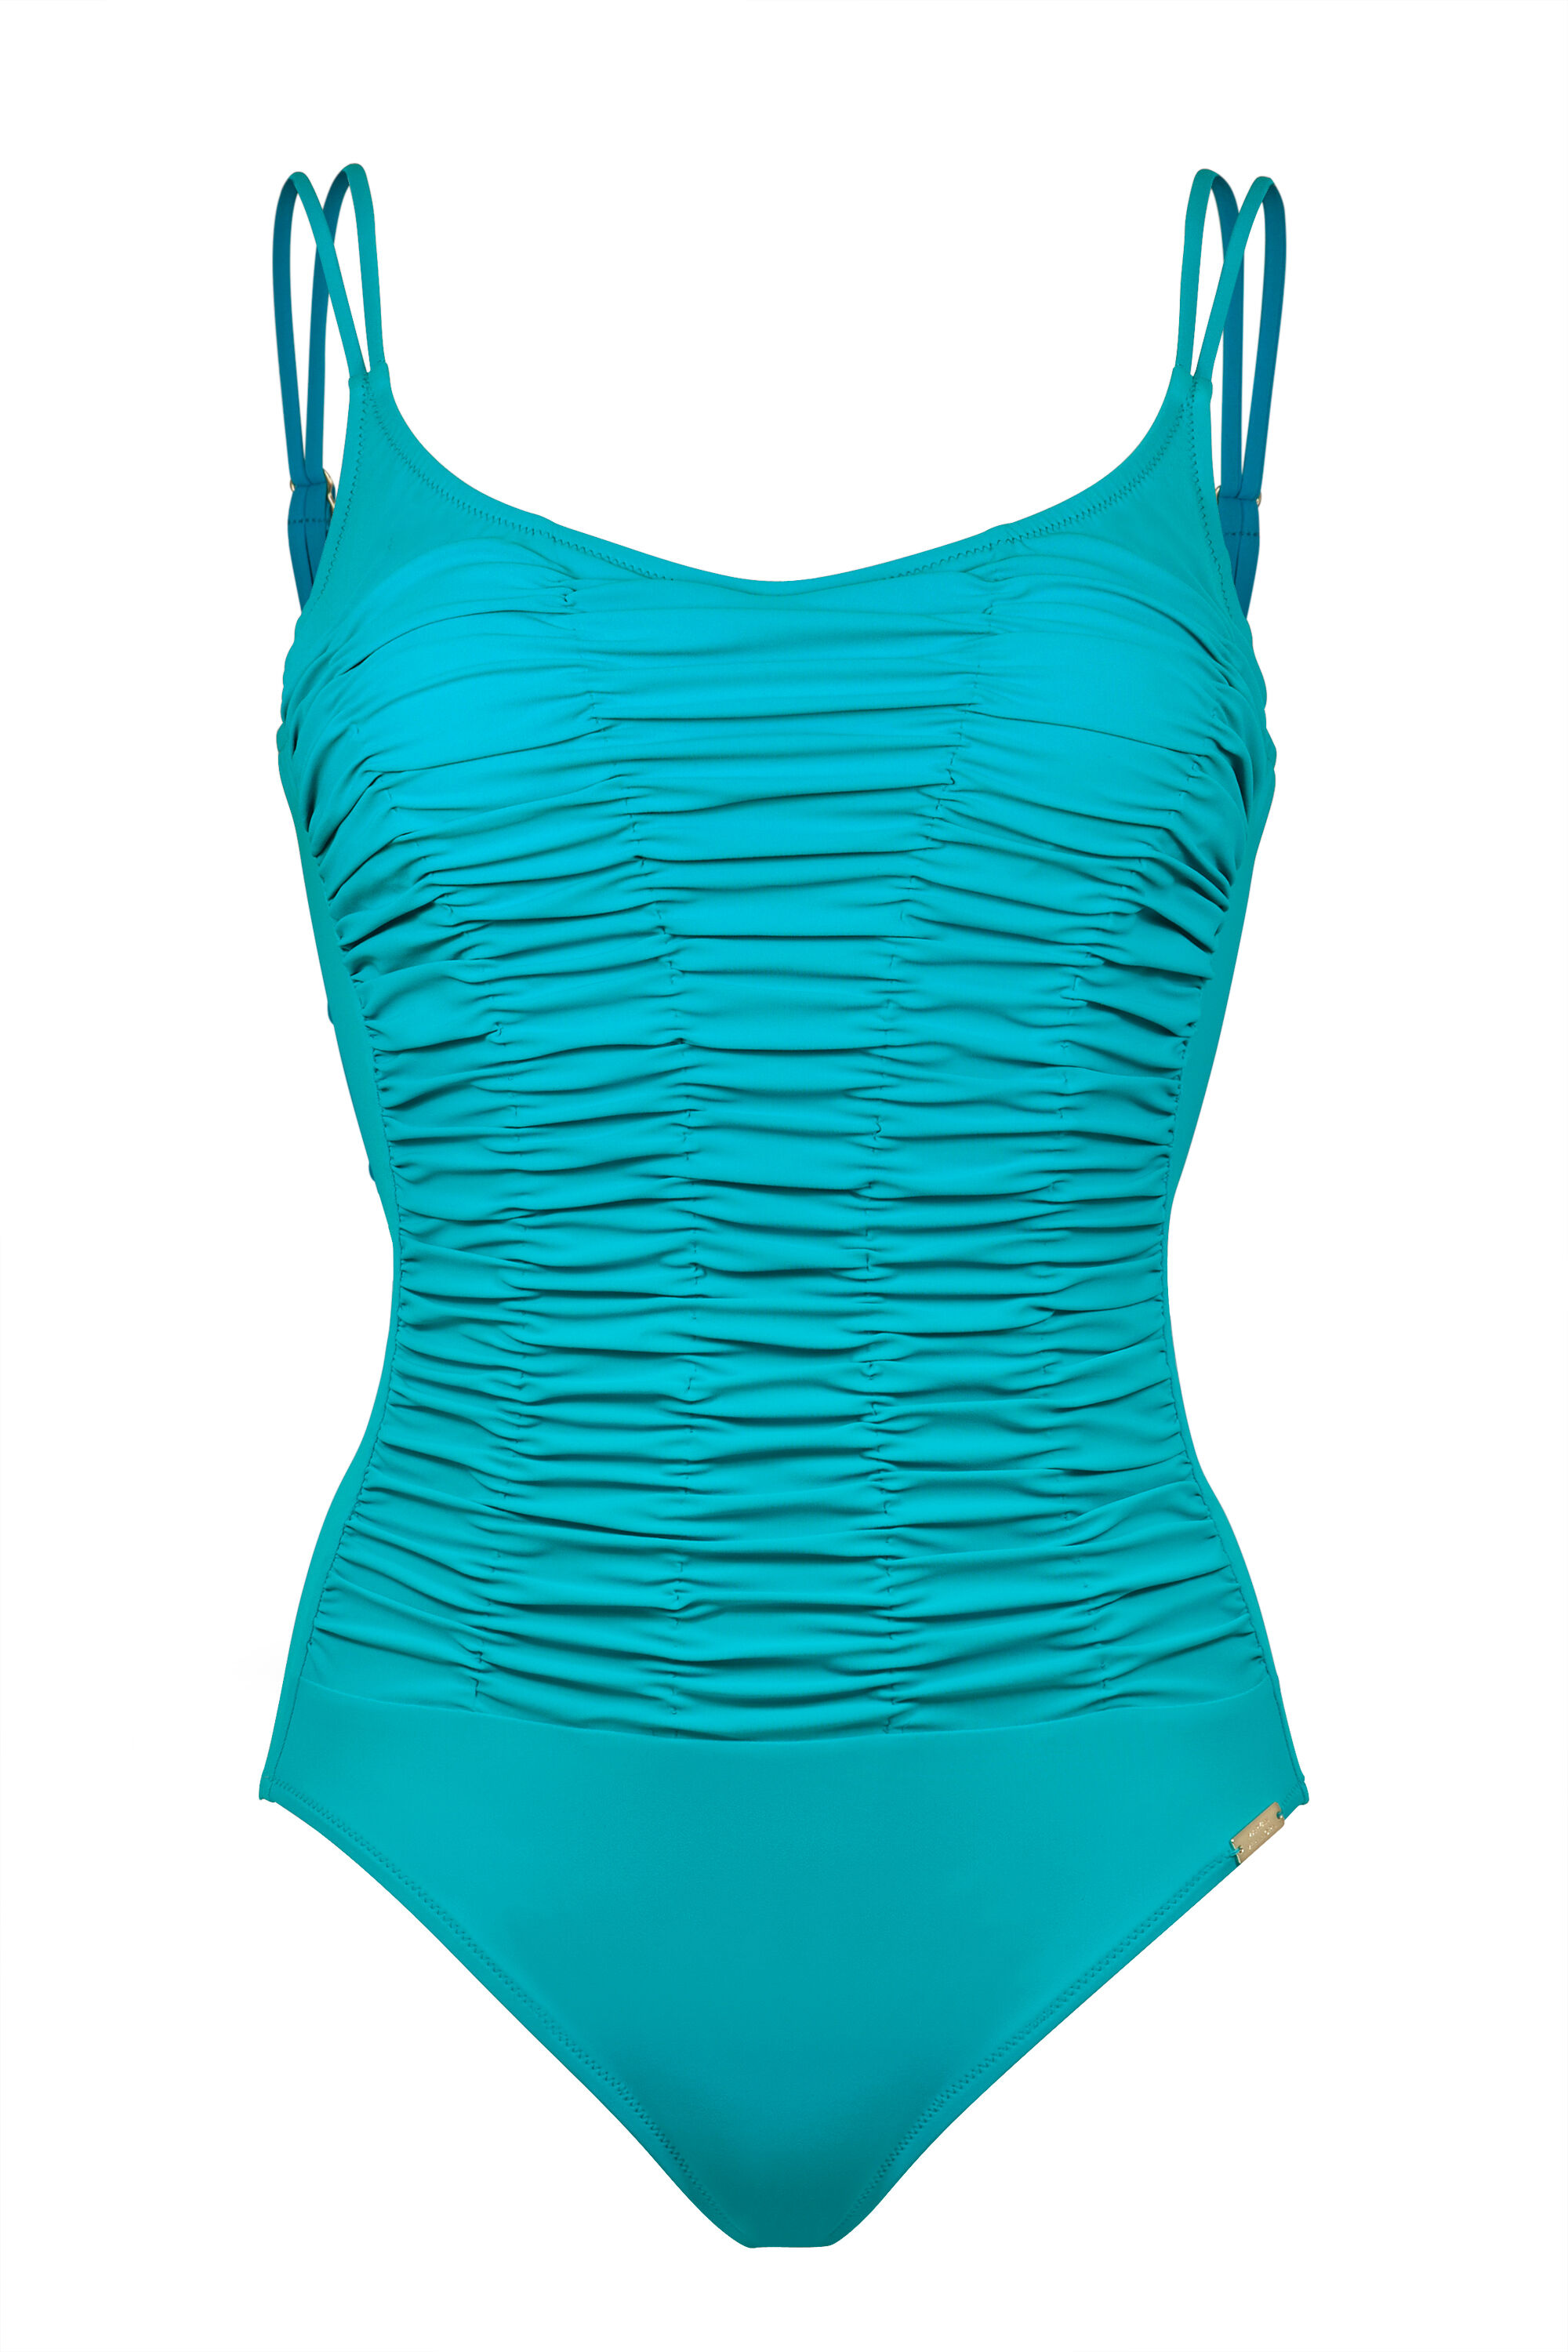 ELEMENTS WIRE SWIMSUIT | MARYAN MEHLHORN